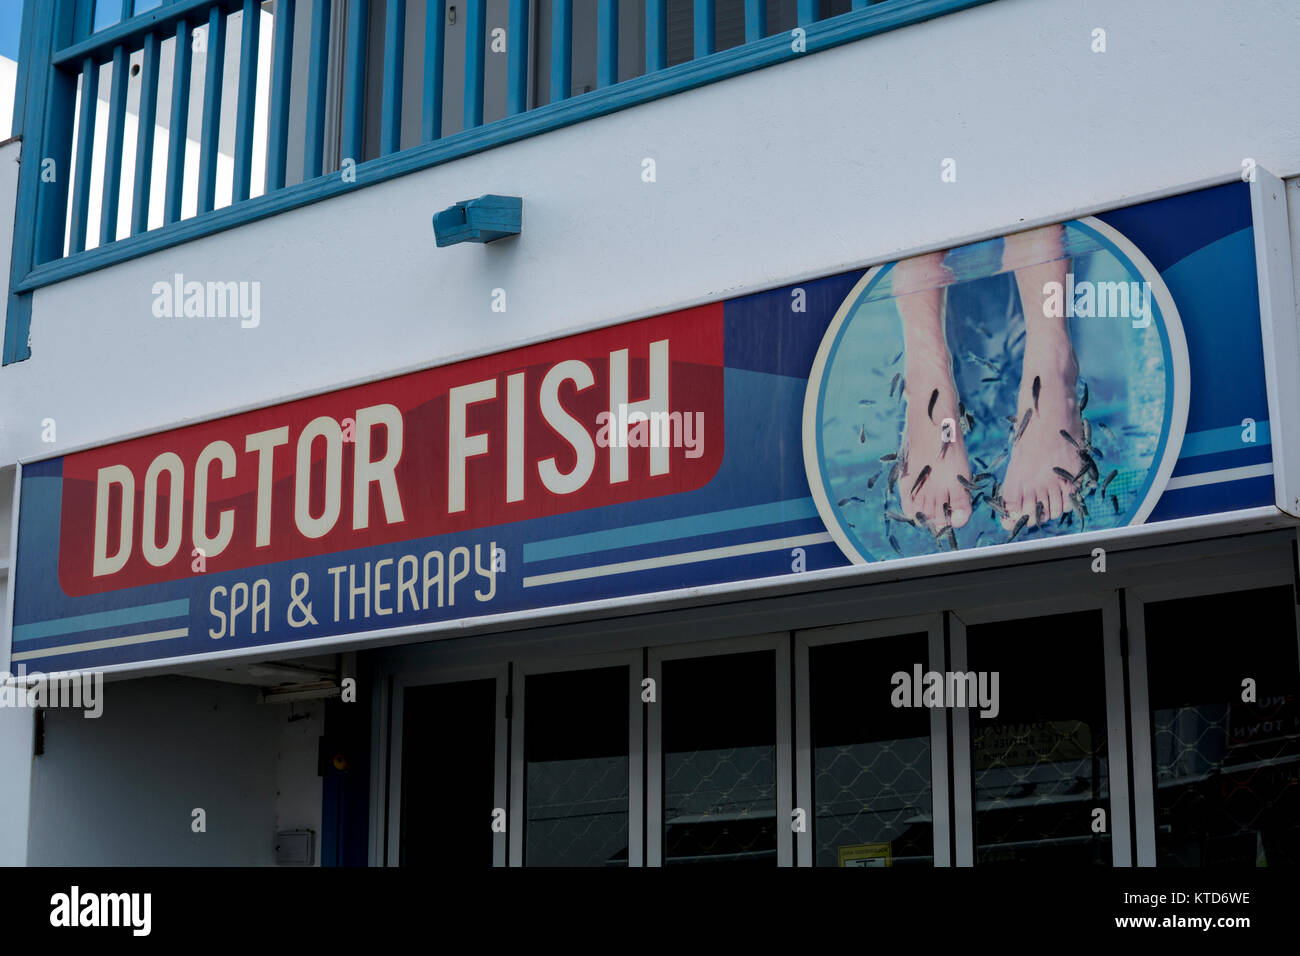 Doctor Fish spa and therapy, Lanzarote, Canary Islands, Spain. Stock Photo